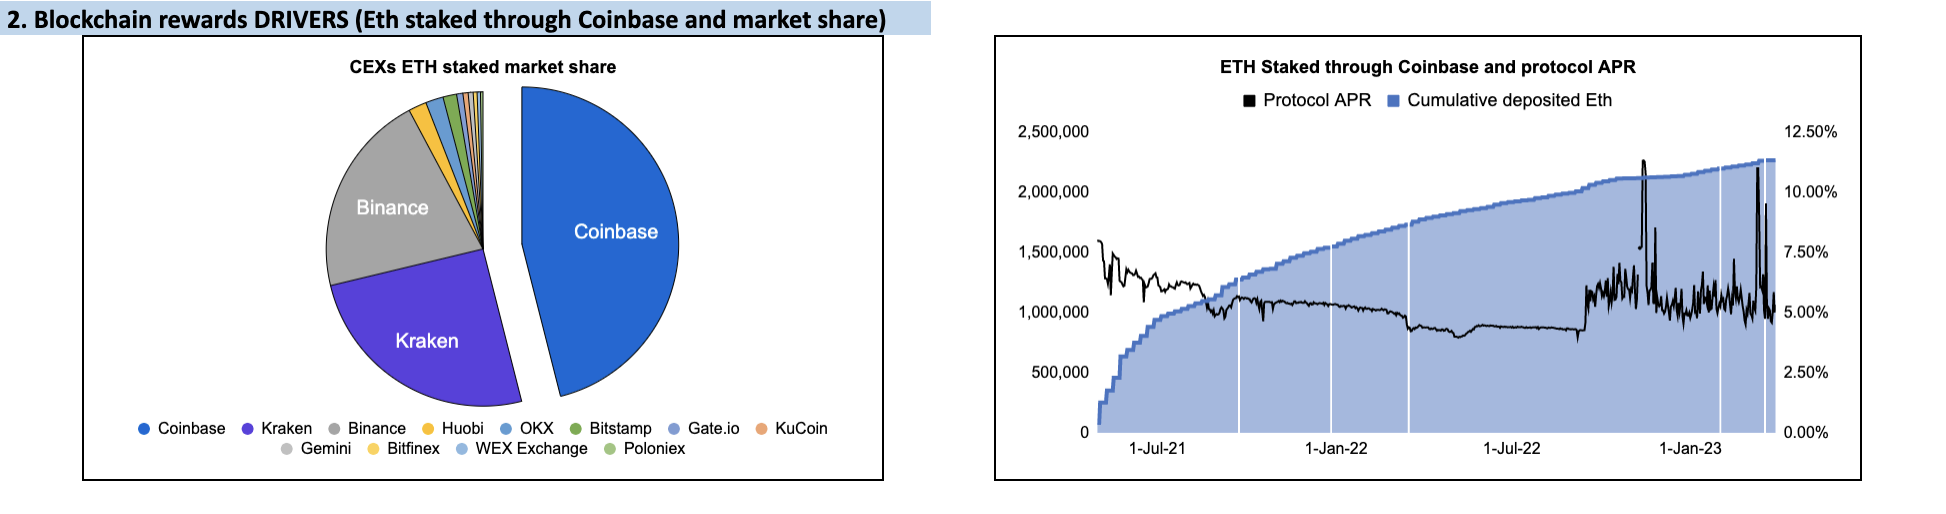 ETH deposited through Coinbase - Market share, cumulative deposits, and protocol apr (April 5, 2023)